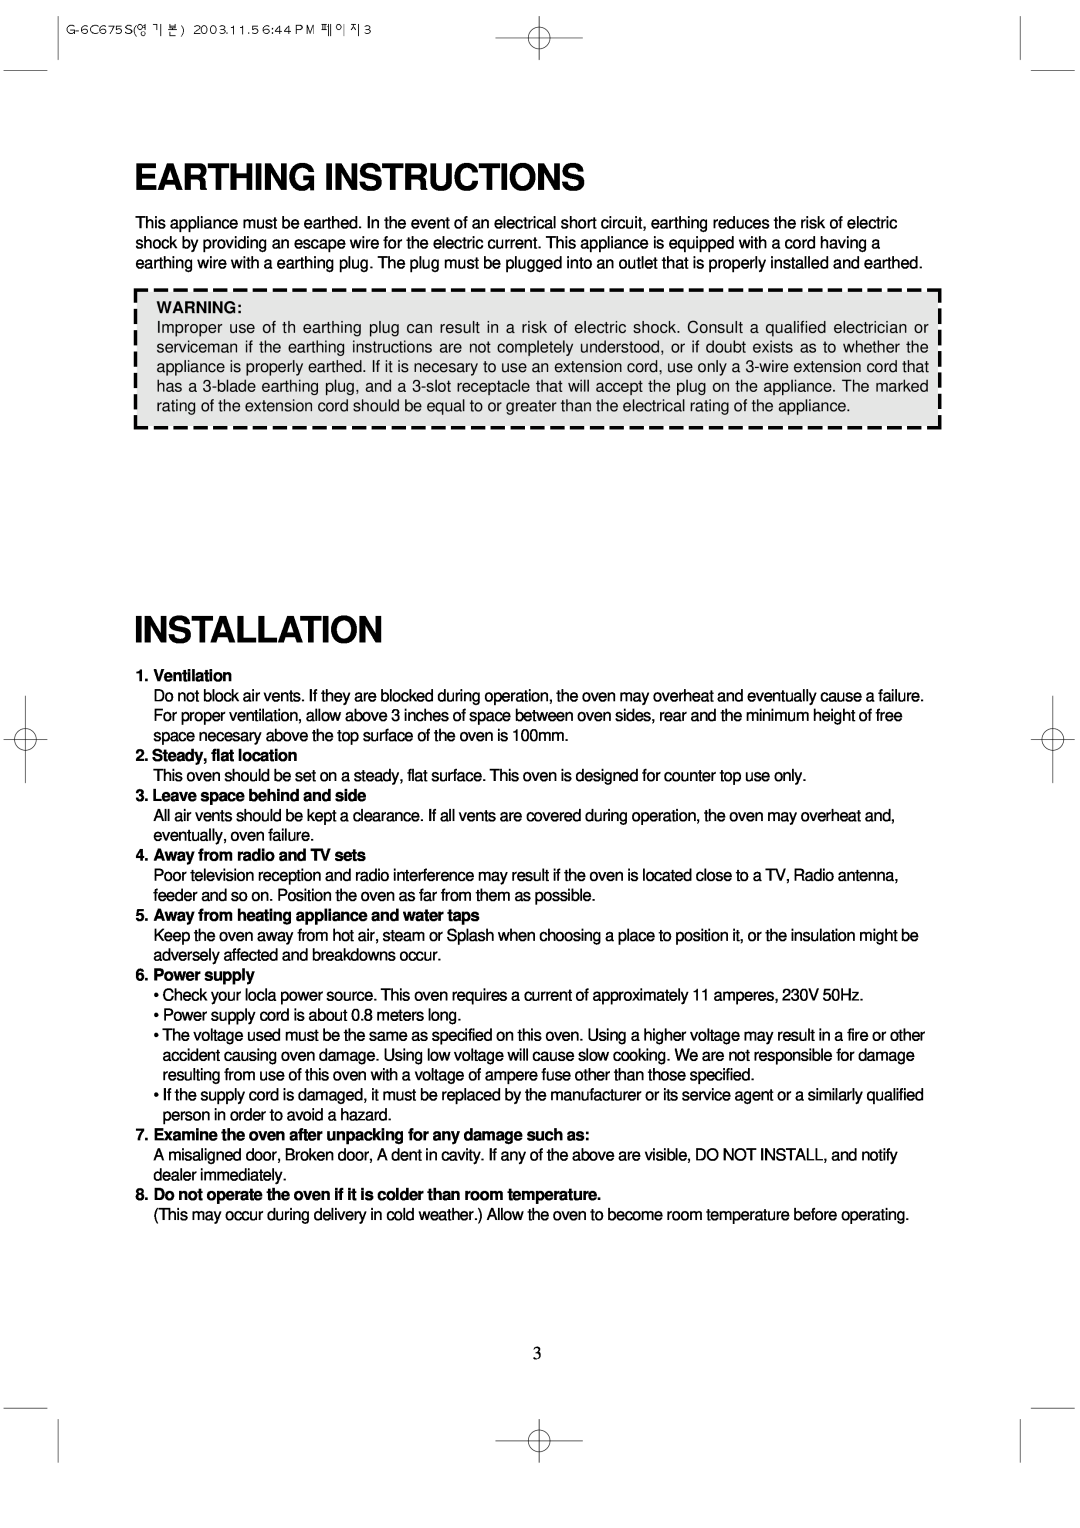 Daewoo KOG-3C675S Earthing Instructions, Installation, Ventilation, Steady, flat location, Leave space behind and side 